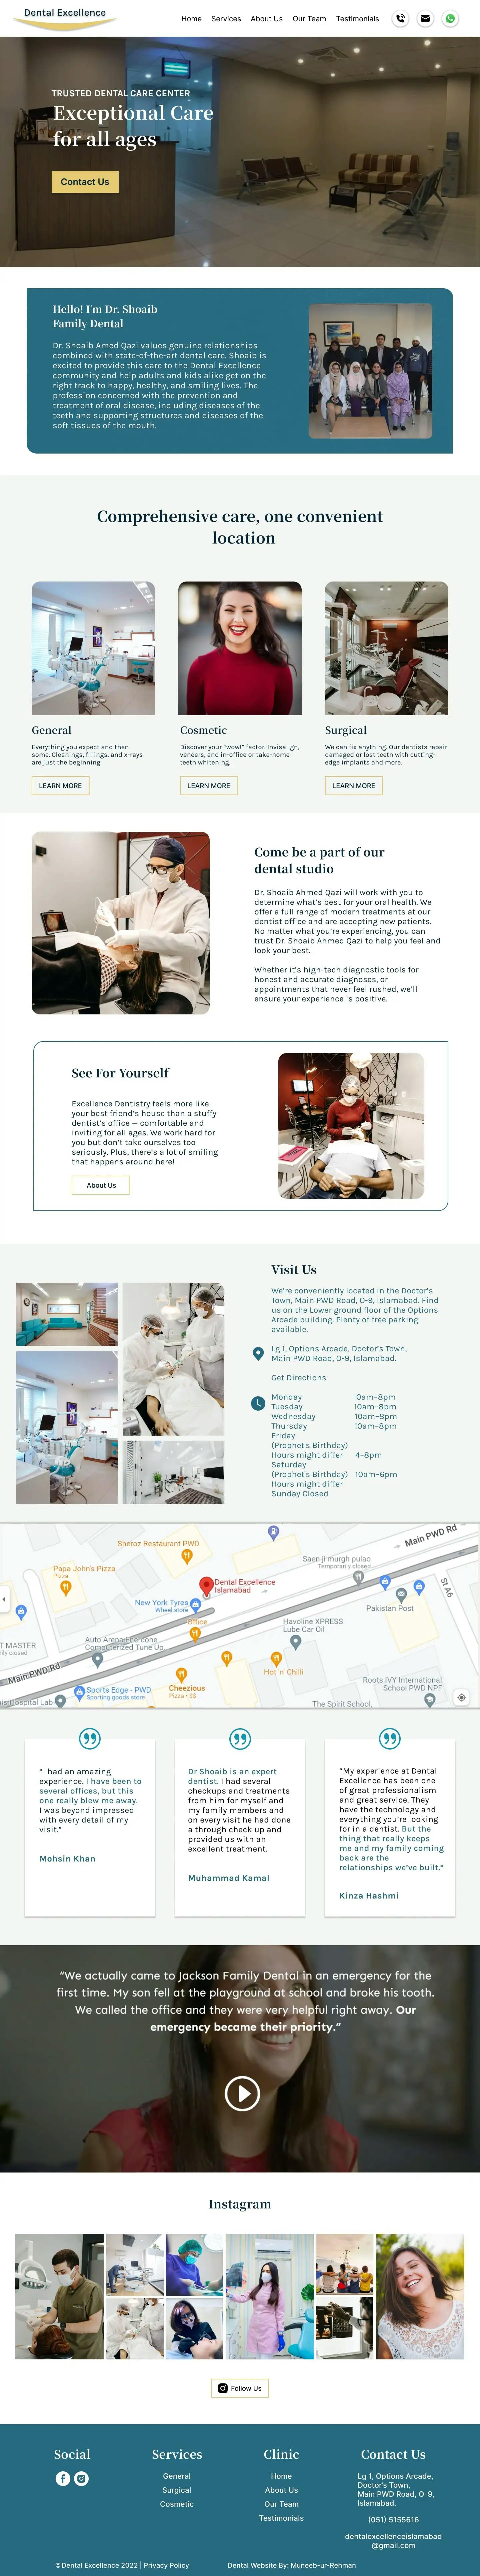 Dental Excellence landing page